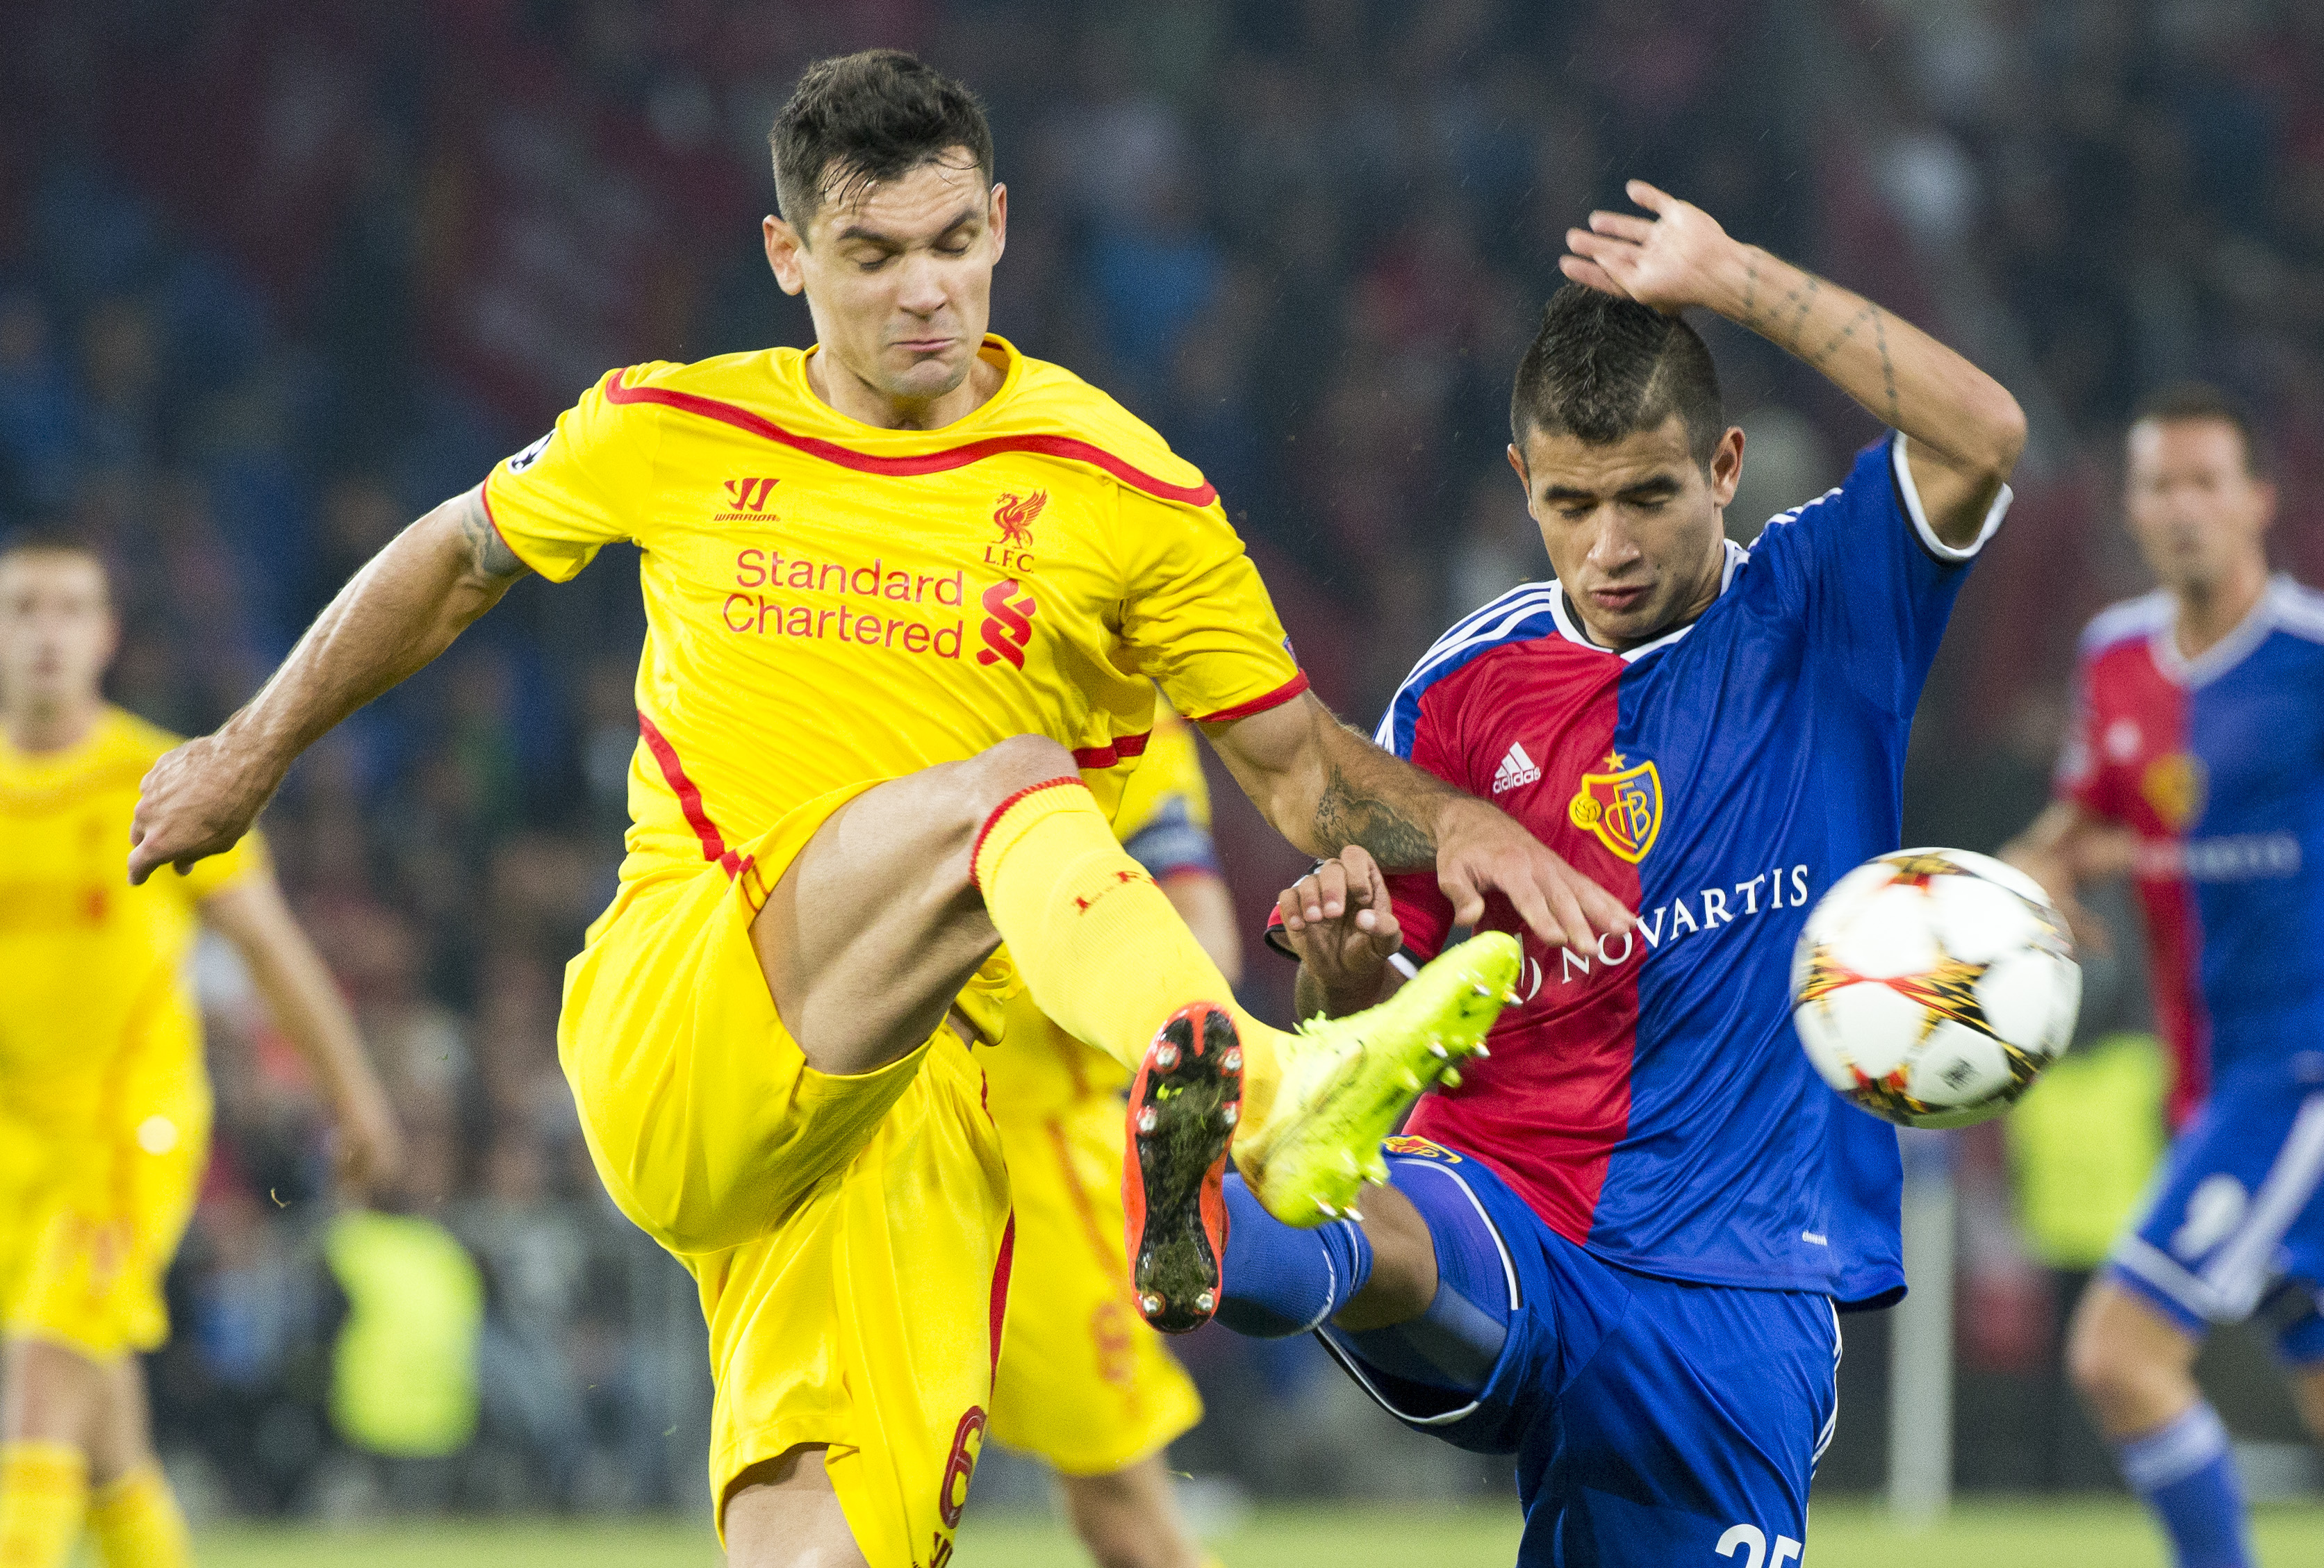 European minnows FC Basel qualified ahead of Liverpool in last year's Champions League group stage. Photo: AP